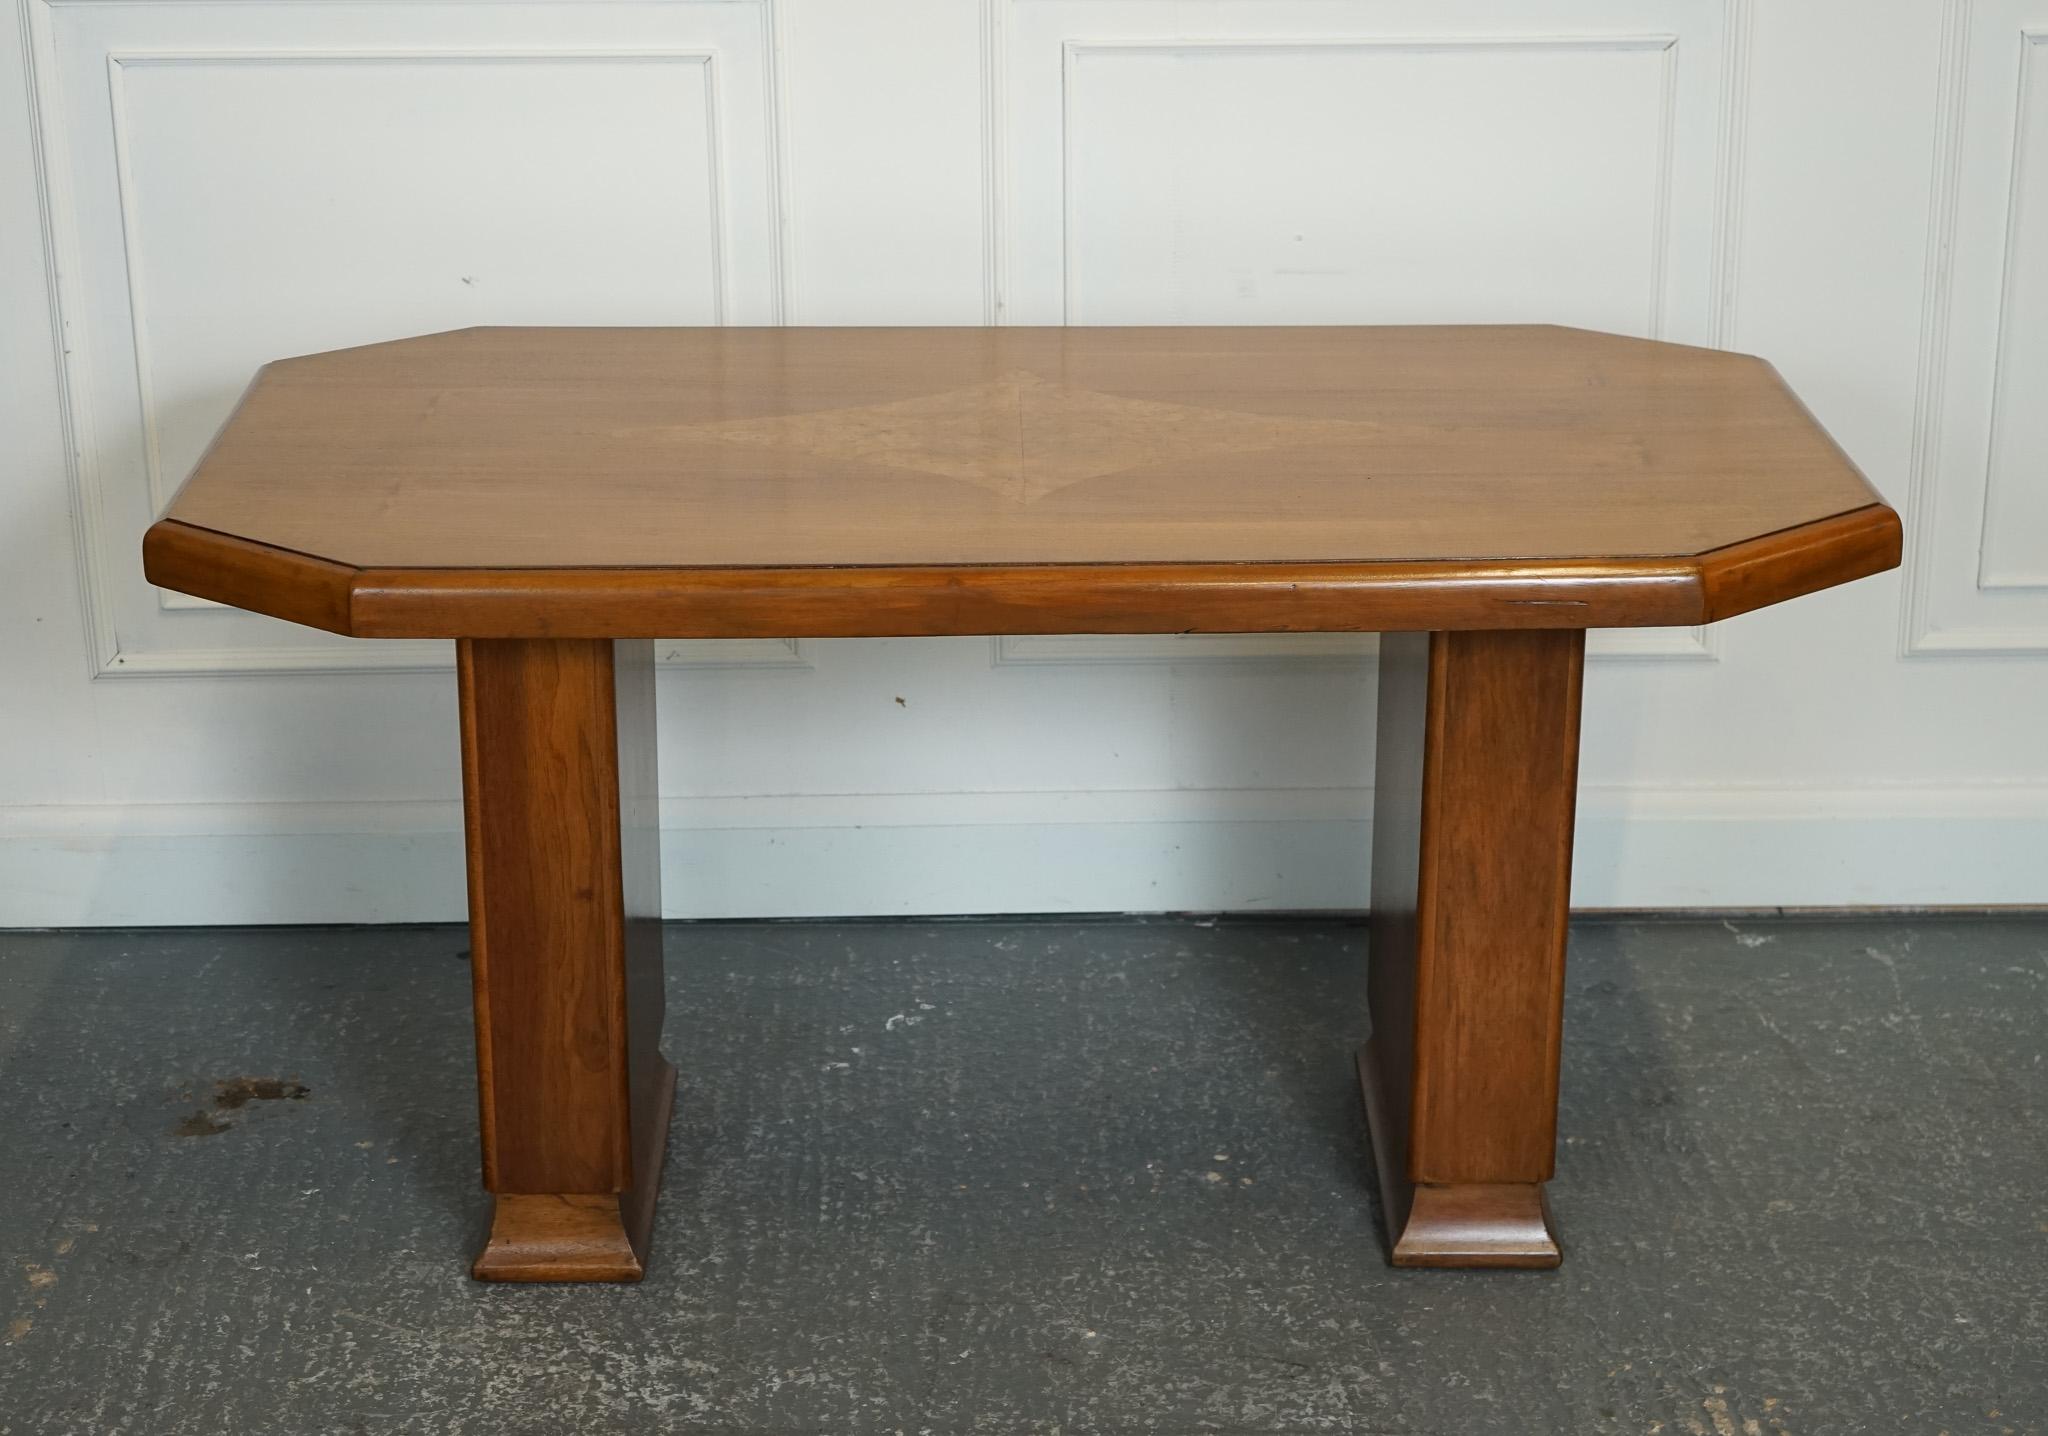 VINTAGE ART DECO WALNUT DINiNG TABLE 4 TO 6 PERSON J1 In Good Condition For Sale In Pulborough, GB